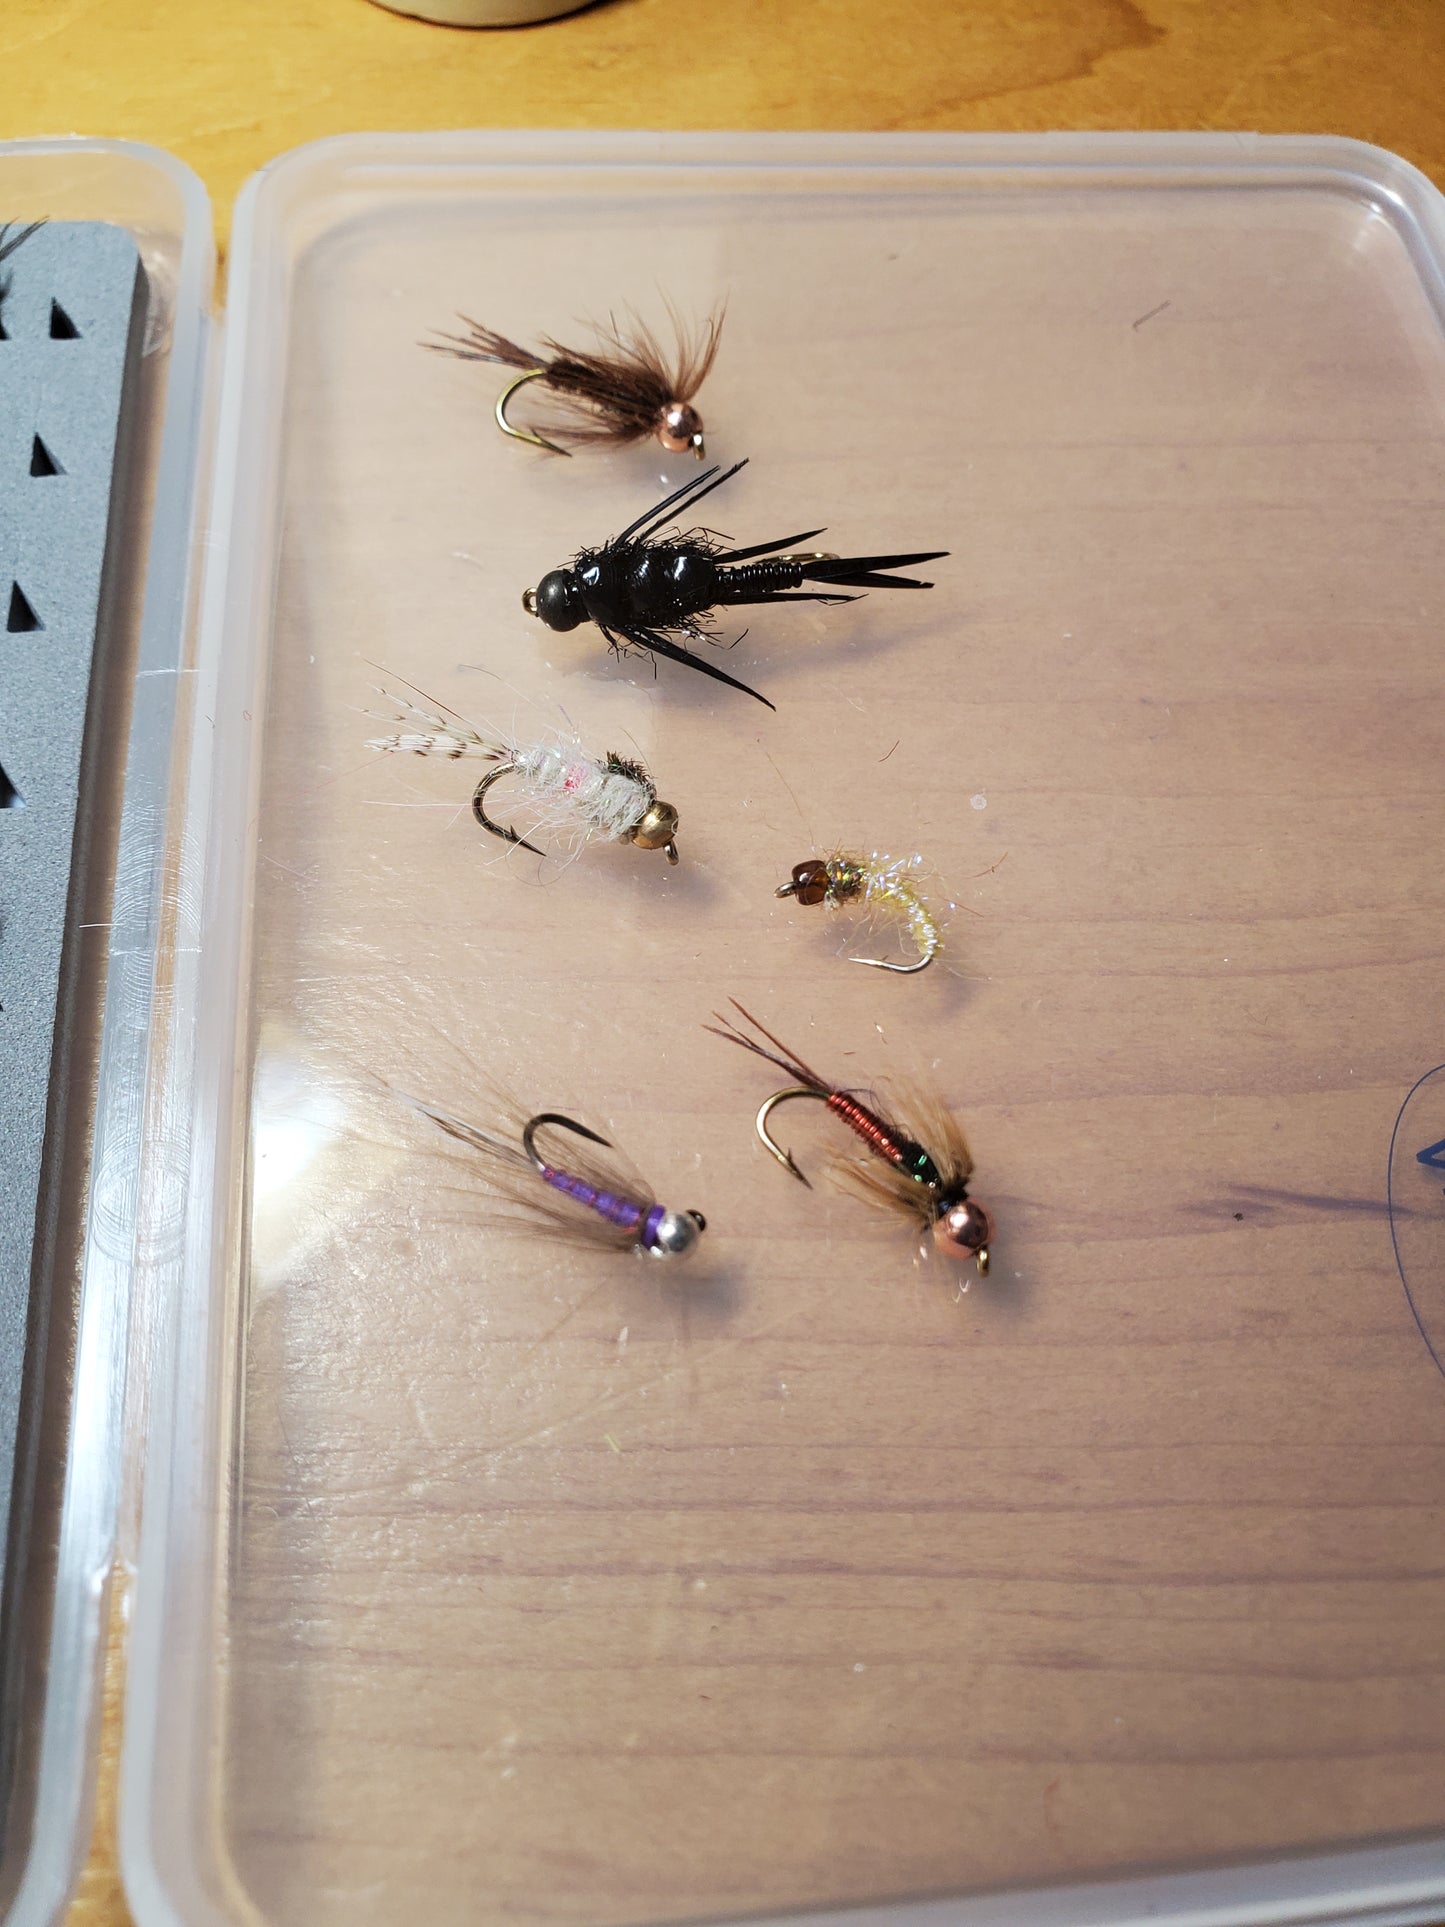 66 Bead Head Nymph Trout Flies in fly Box, Trout Fly Assortment, Nymph